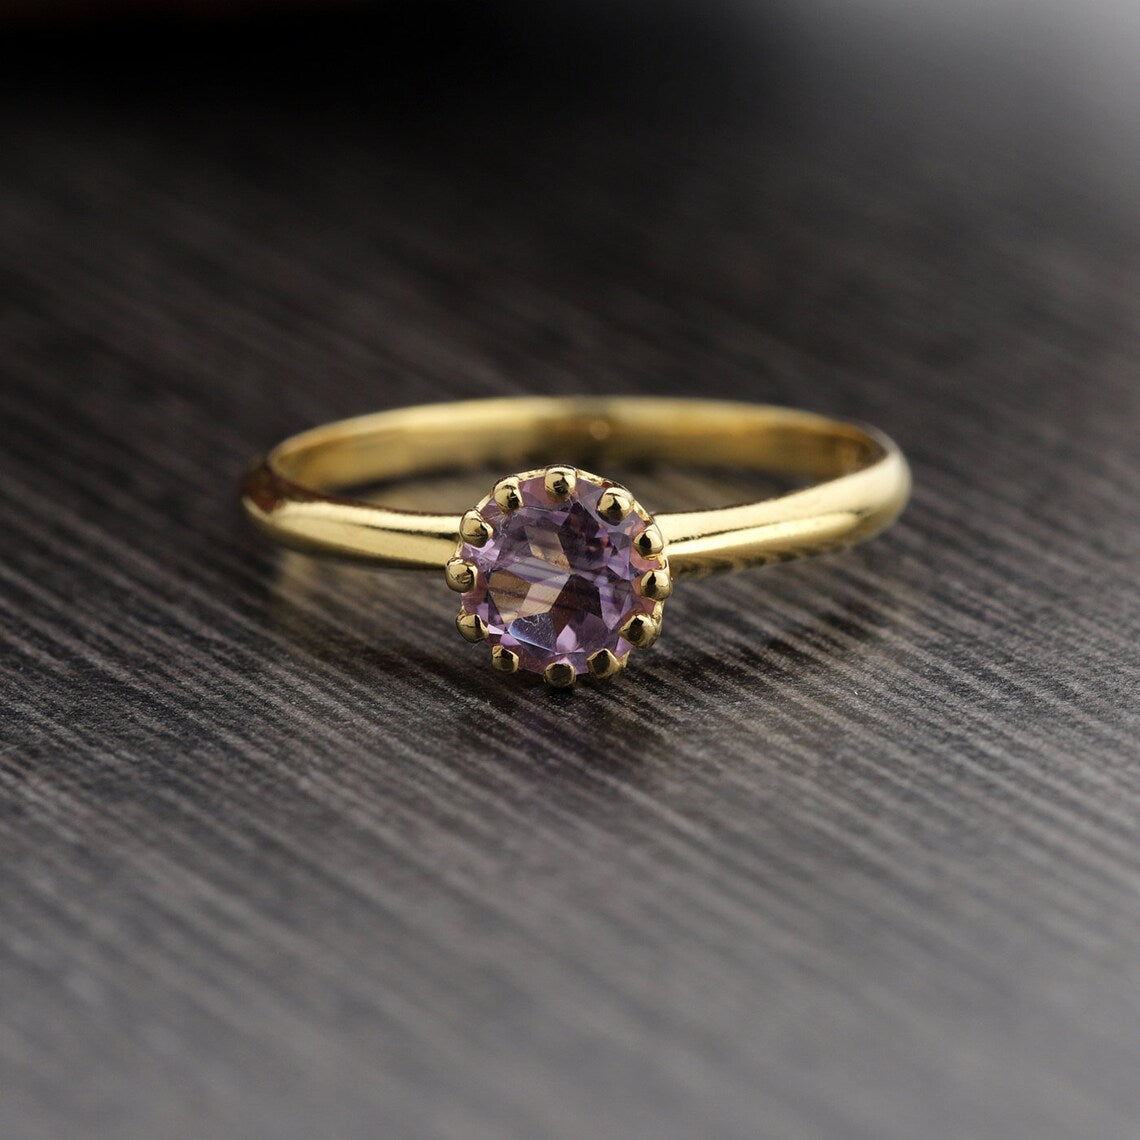 Natural Round Amethyst Minimalist Ring, Sterling Silver Amethyst Gemstone Stacking Ring